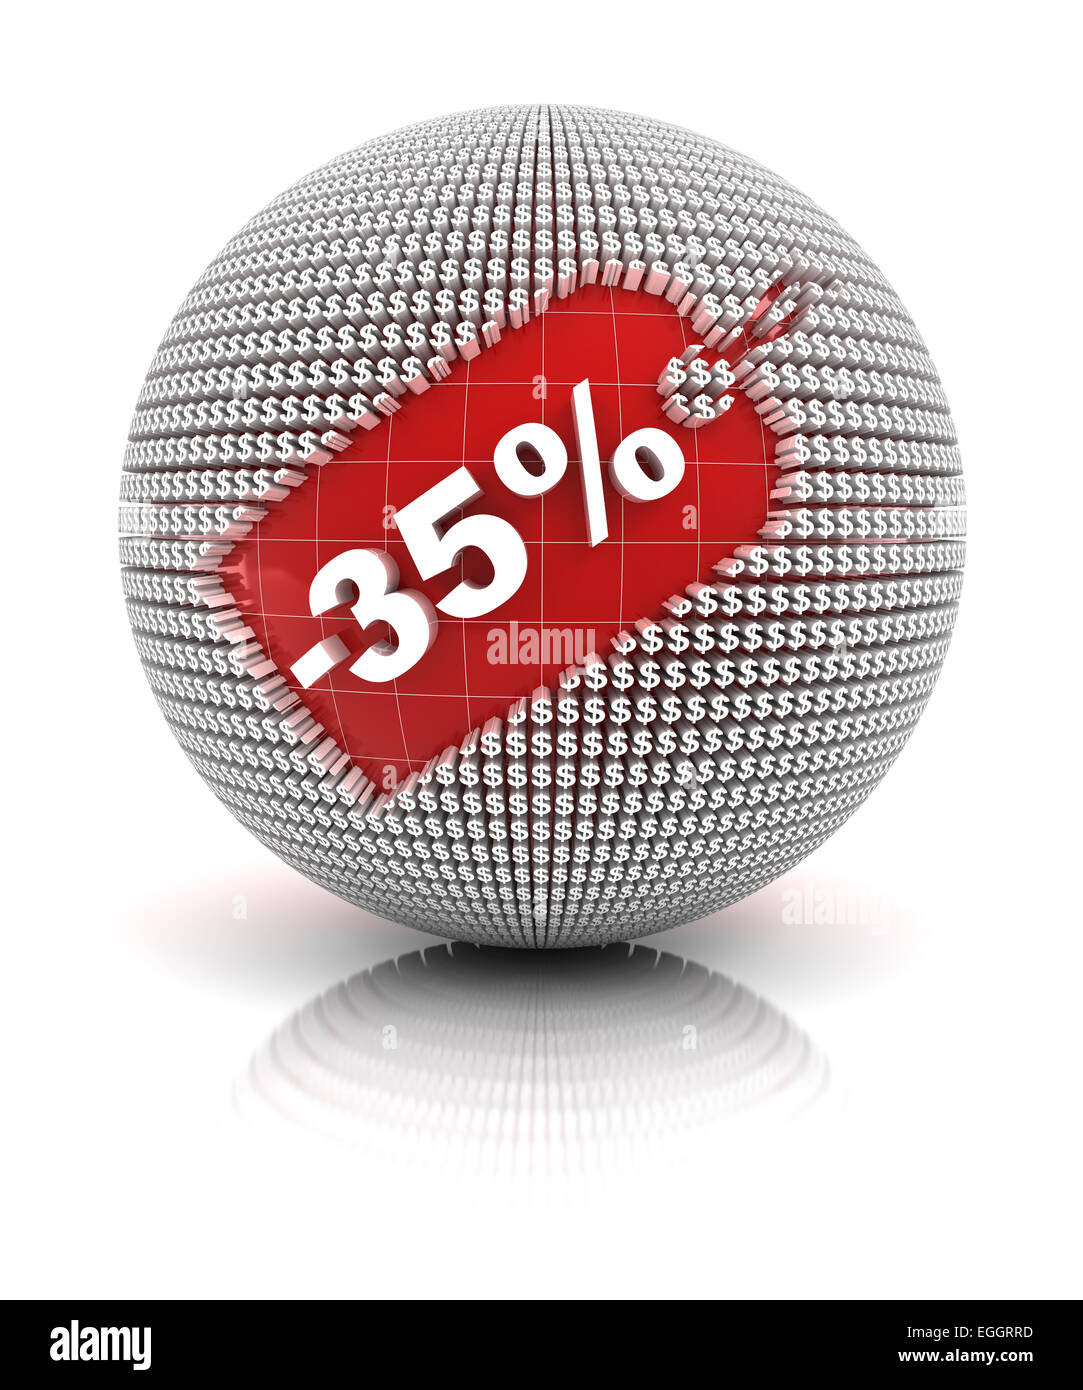 35 percent off sale tag on a sphere Stock Photo